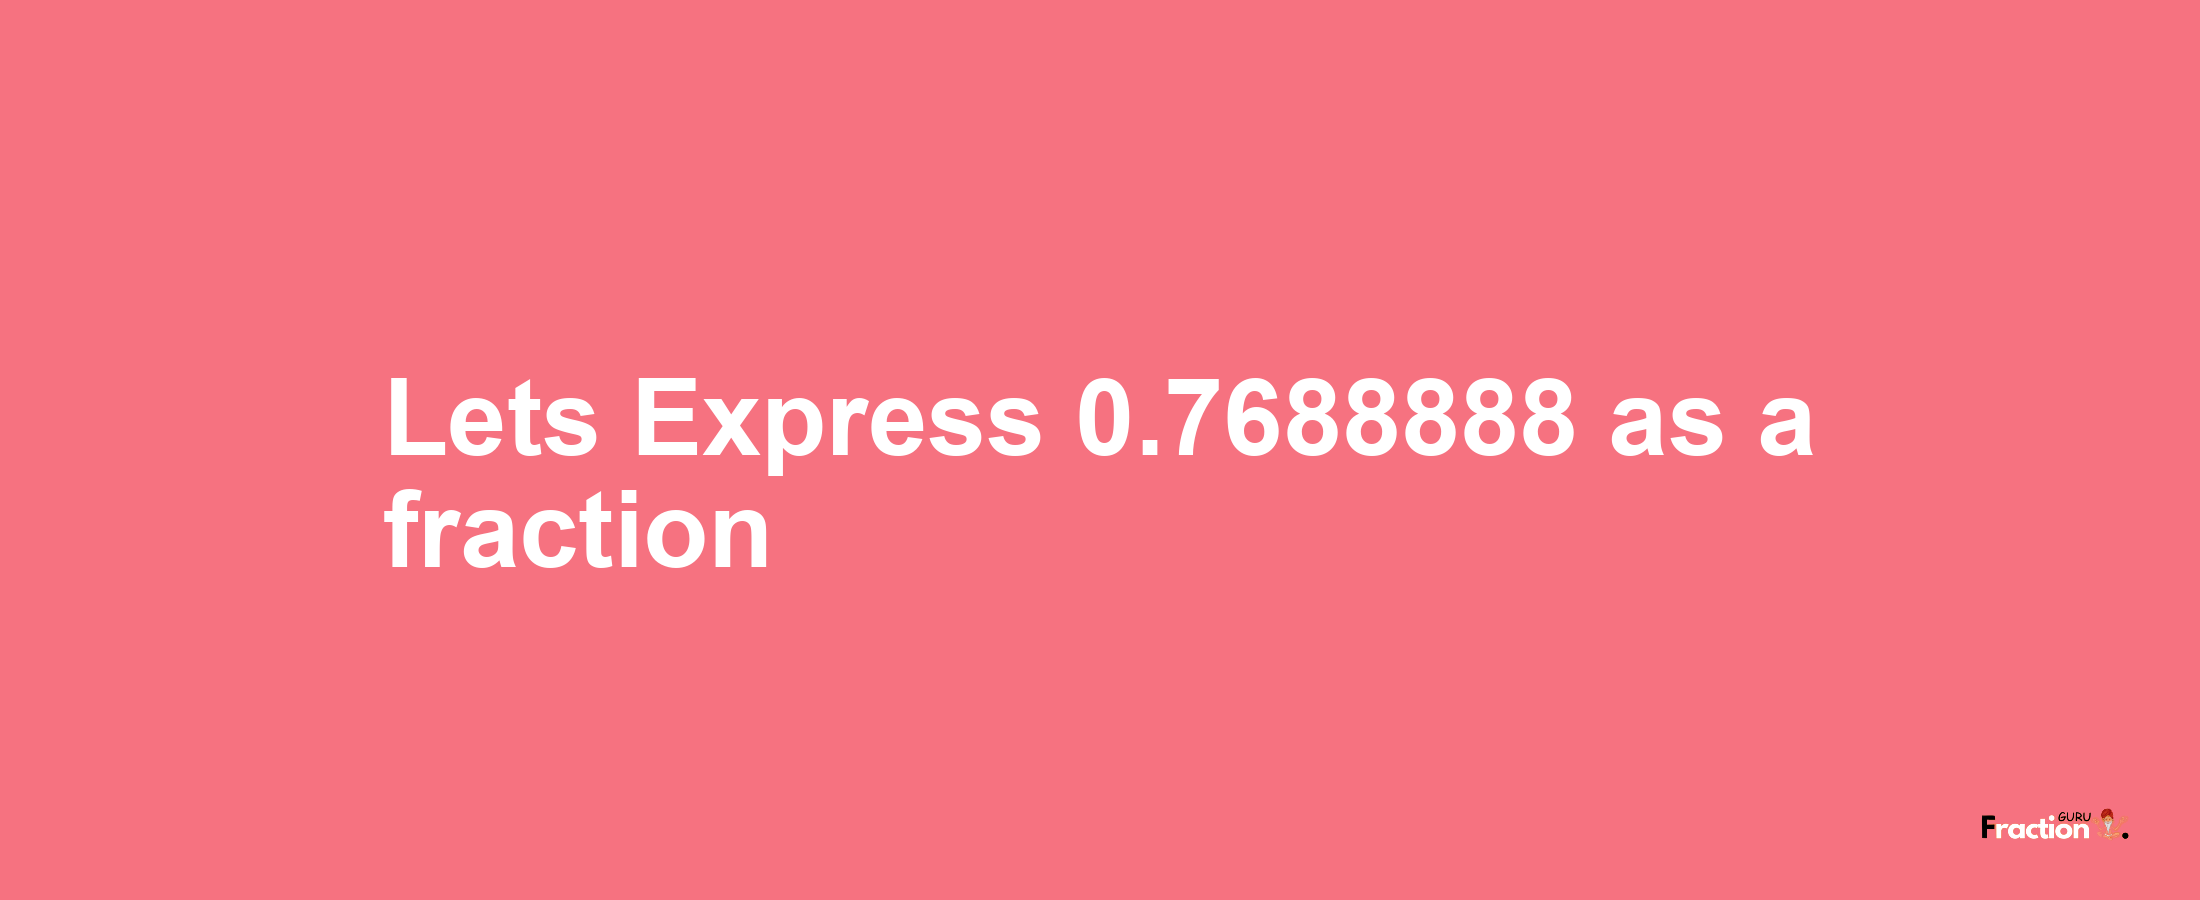 Lets Express 0.7688888 as afraction